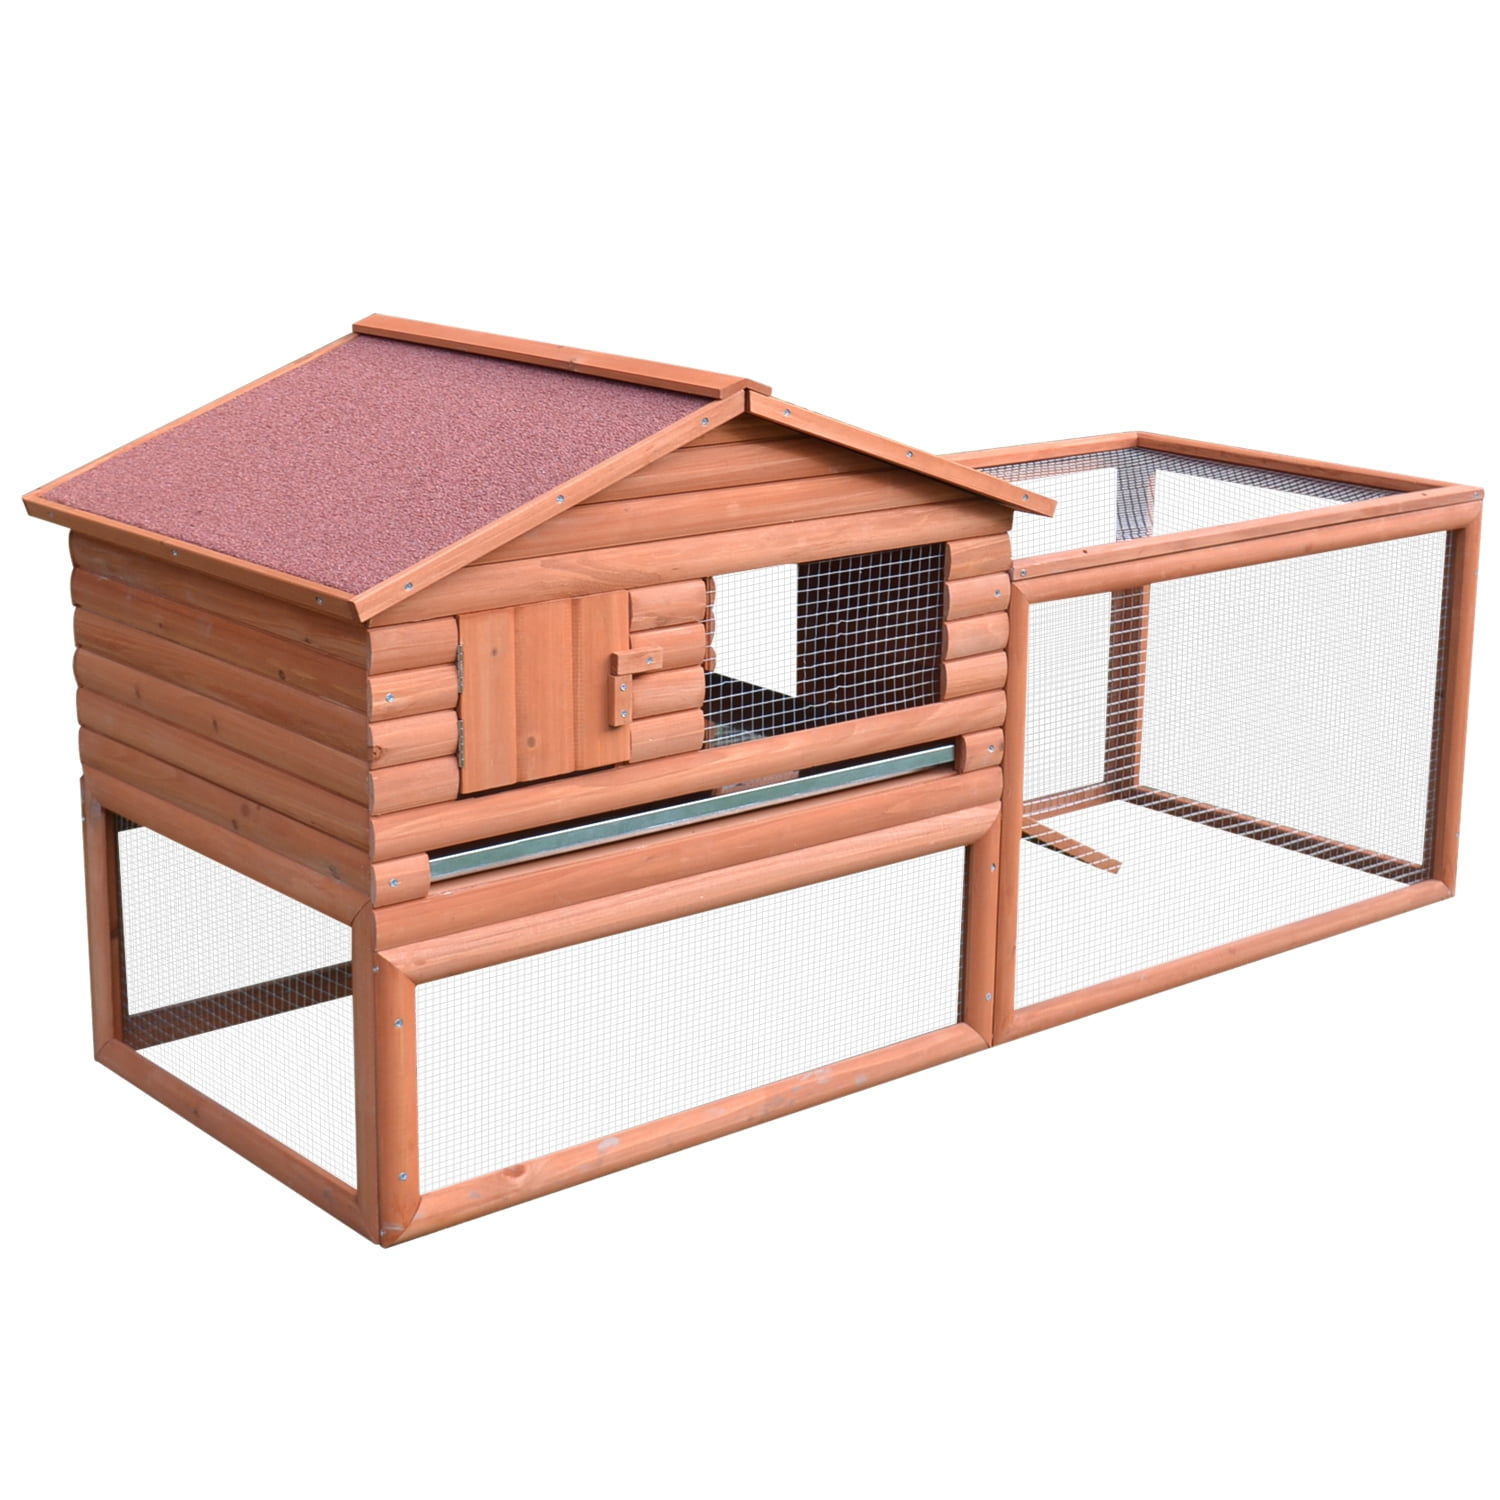 Pawhut Outdoor Large Log Cabin Rabbit, Outdoor Rabbit Cage With Run